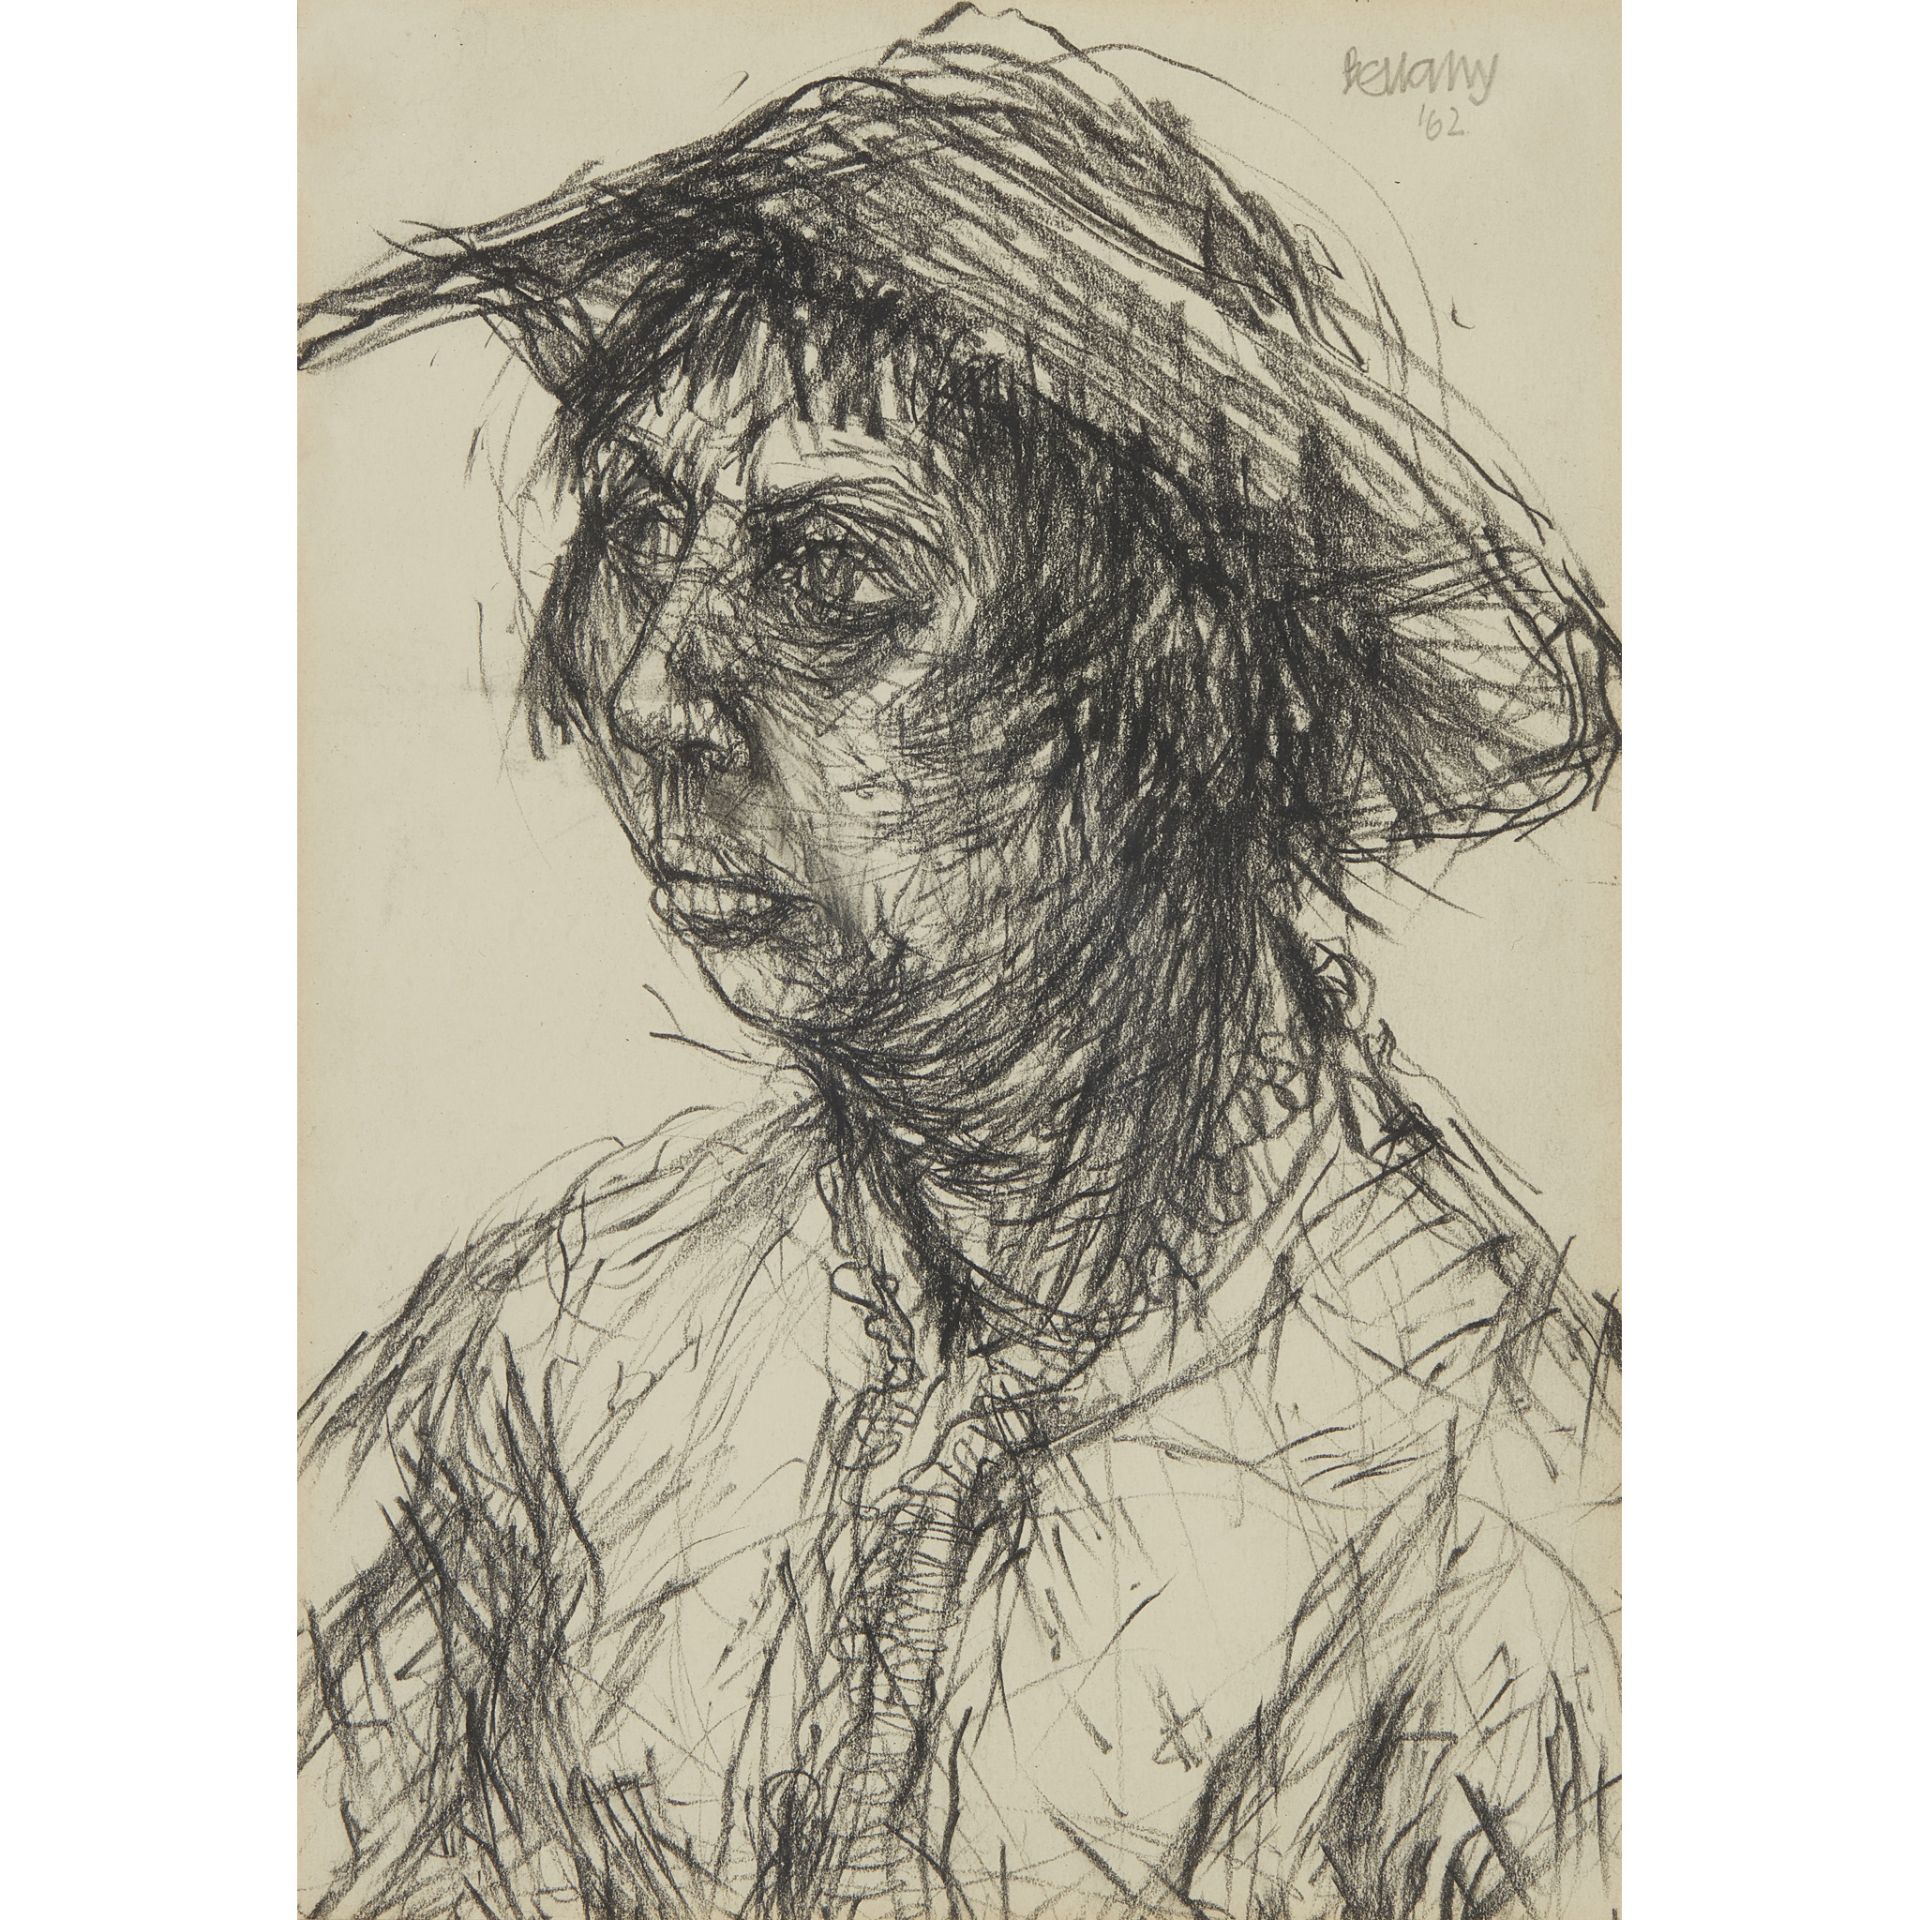 § JOHN BELLANY C.B.E., R.A. (SCOTTISH 1942-2013) PORTRAIT STUDY: WOMAN IN A HAT, POSSIBLY THE